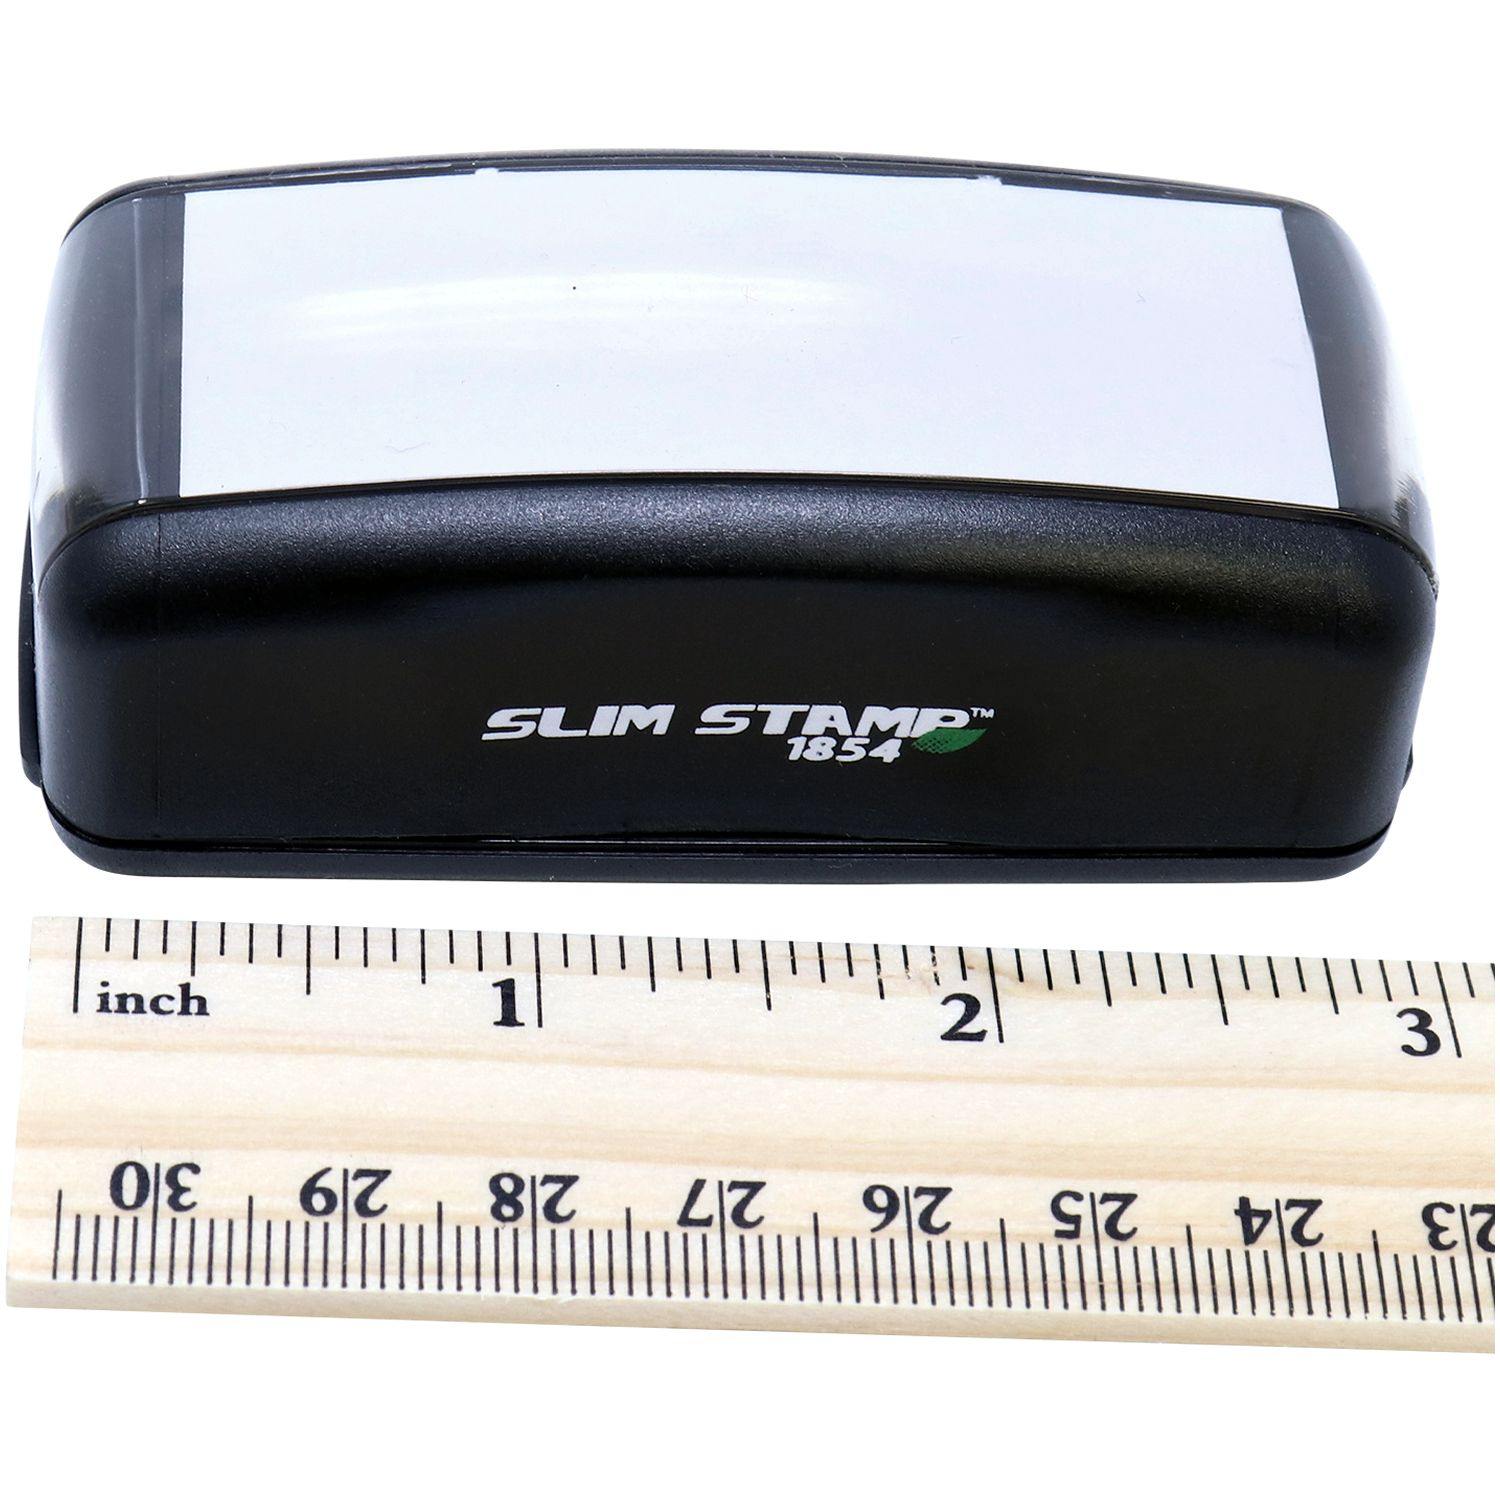 Measurement Large Pre-Inked Check Your Work Stamp with Ruler